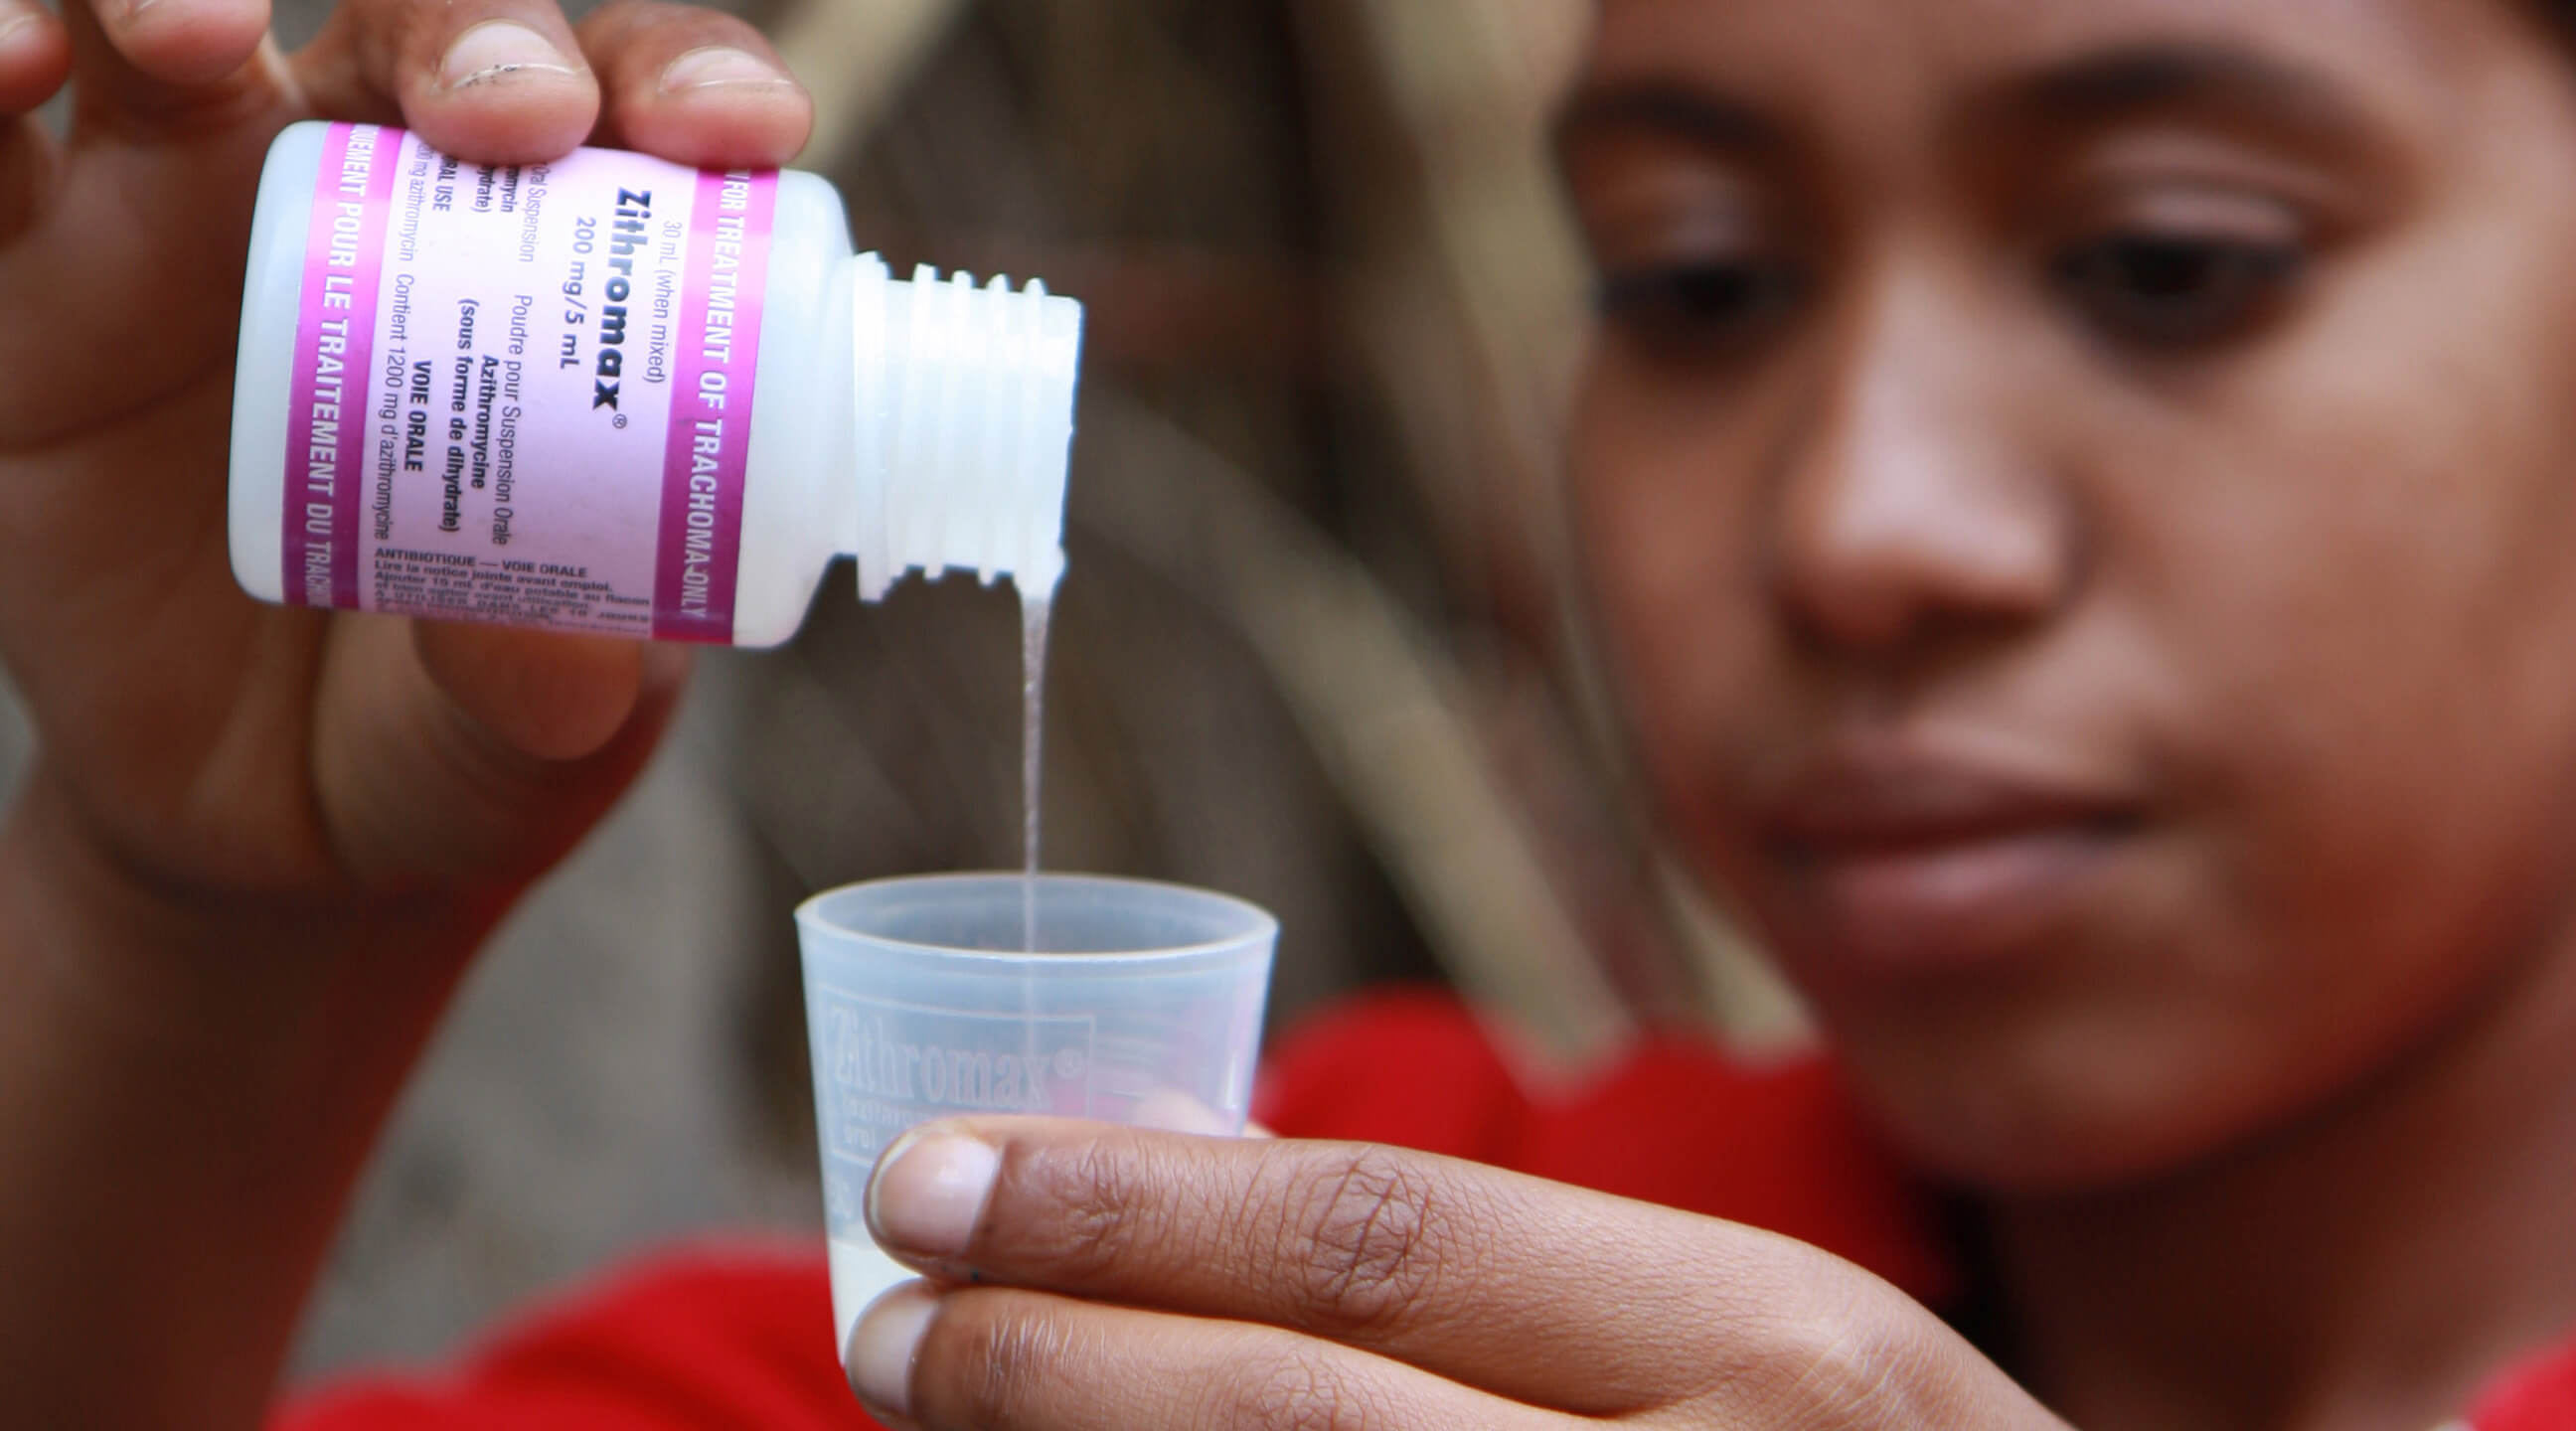 A health worker in Ethiopia pours a dose of the antibiotic syrup of Zithromax ® (azithromycin), which is used to treat the eye disease trachoma.